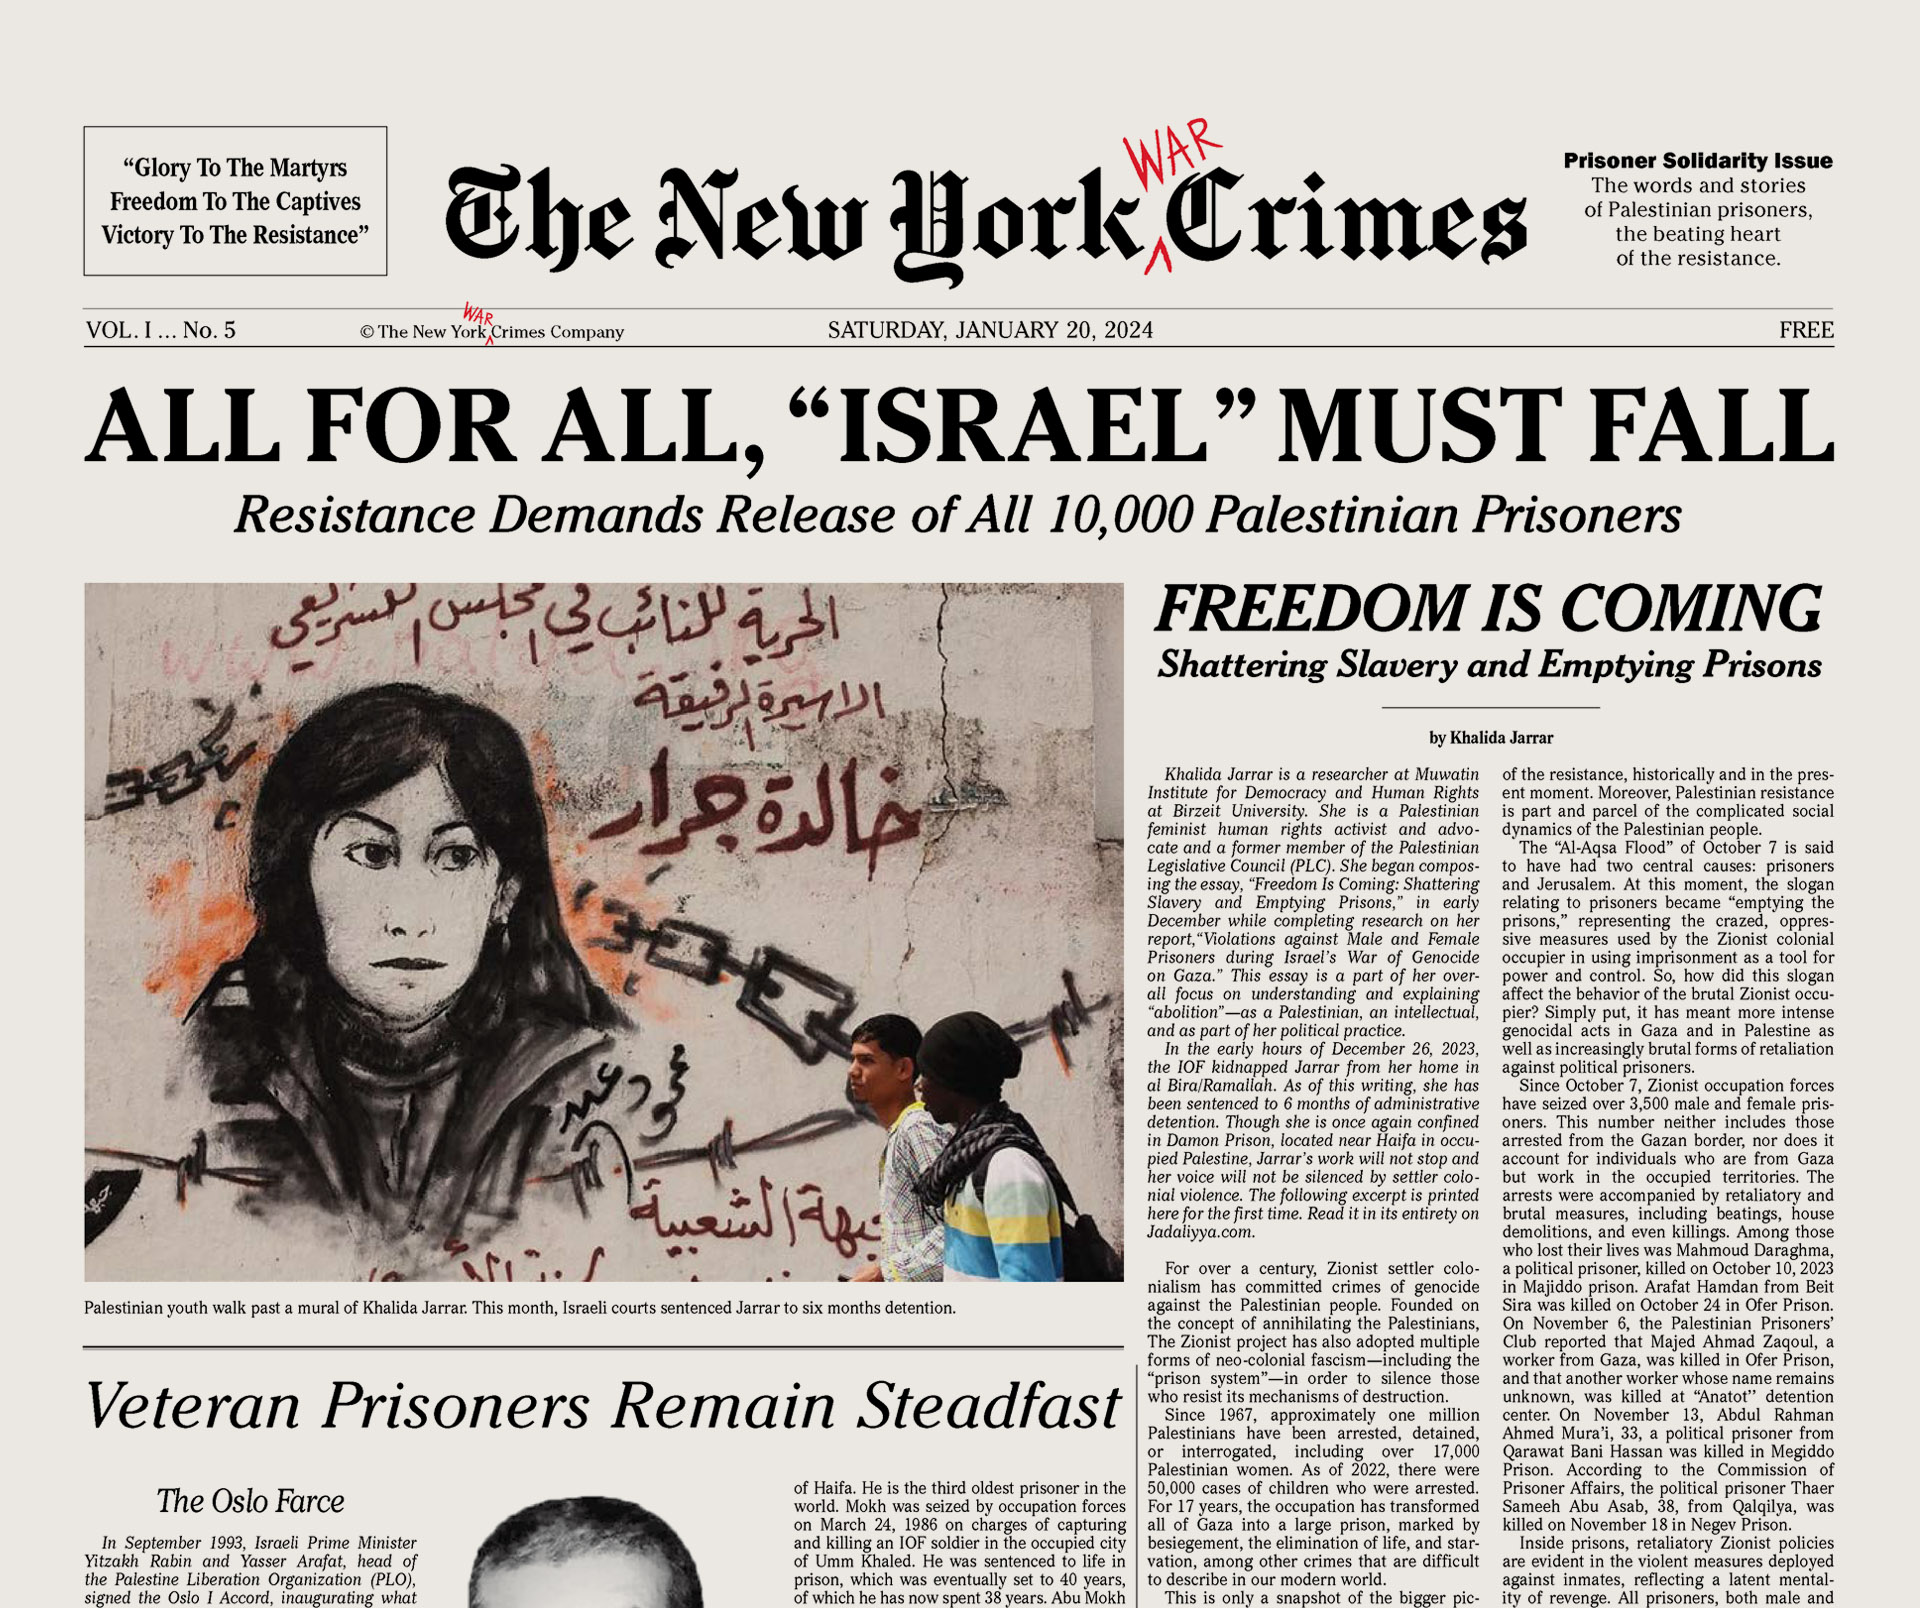 https://newyorkwarcrimes.com/media/pages/print-issue-vol-i-no-5-all-for-all-israel-must-fall/b92f6d8bd2-1709308545/ny-crimes-05-cover.jpg